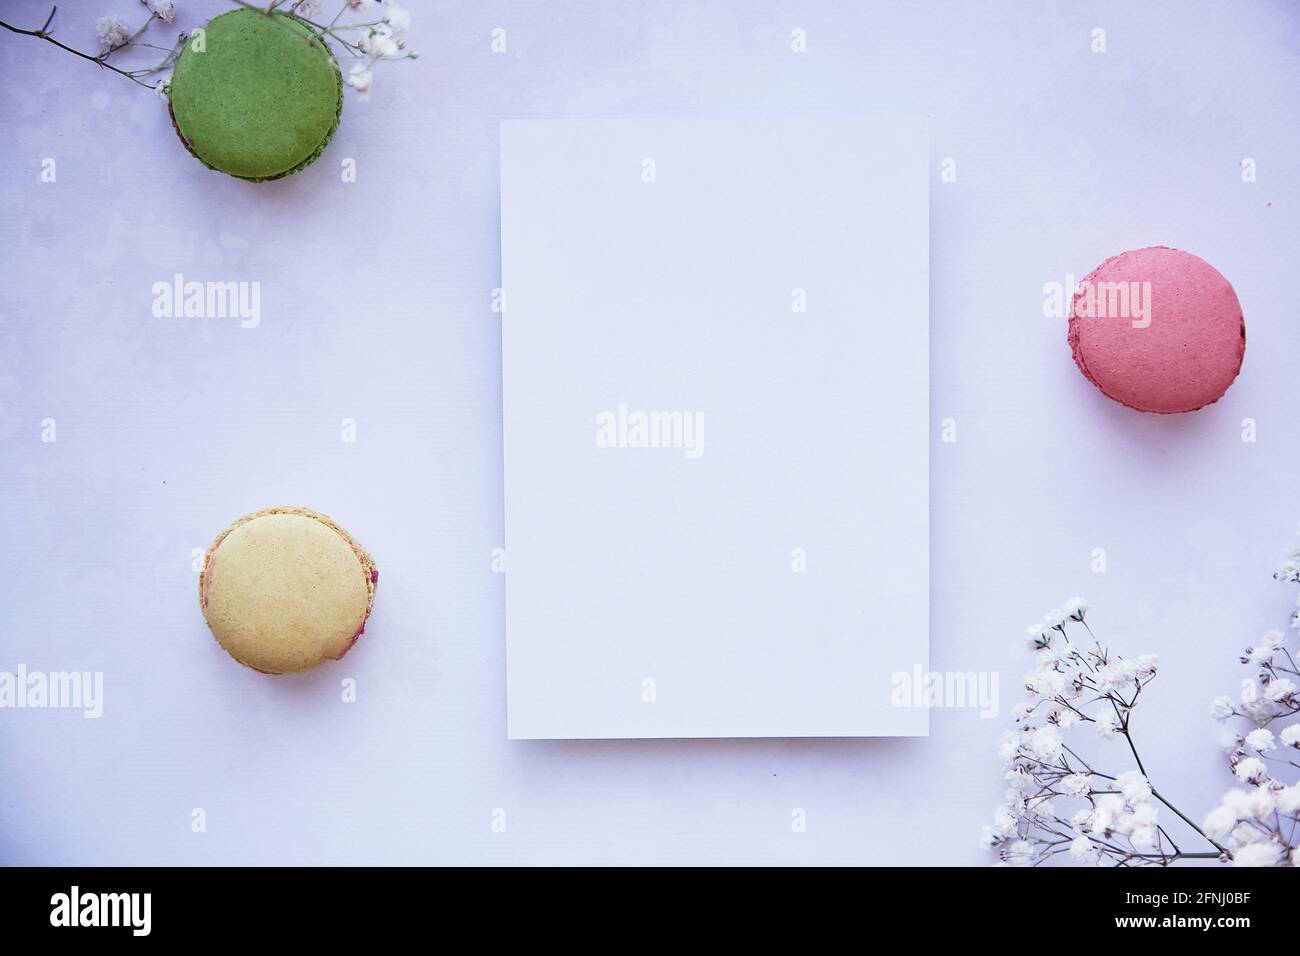 Mock up of stationery card on purple vintage surface. Bright colorful macaroons, gypsophila. Happy holidays or present card concept. Top view. Feminine concept. Stock Photo